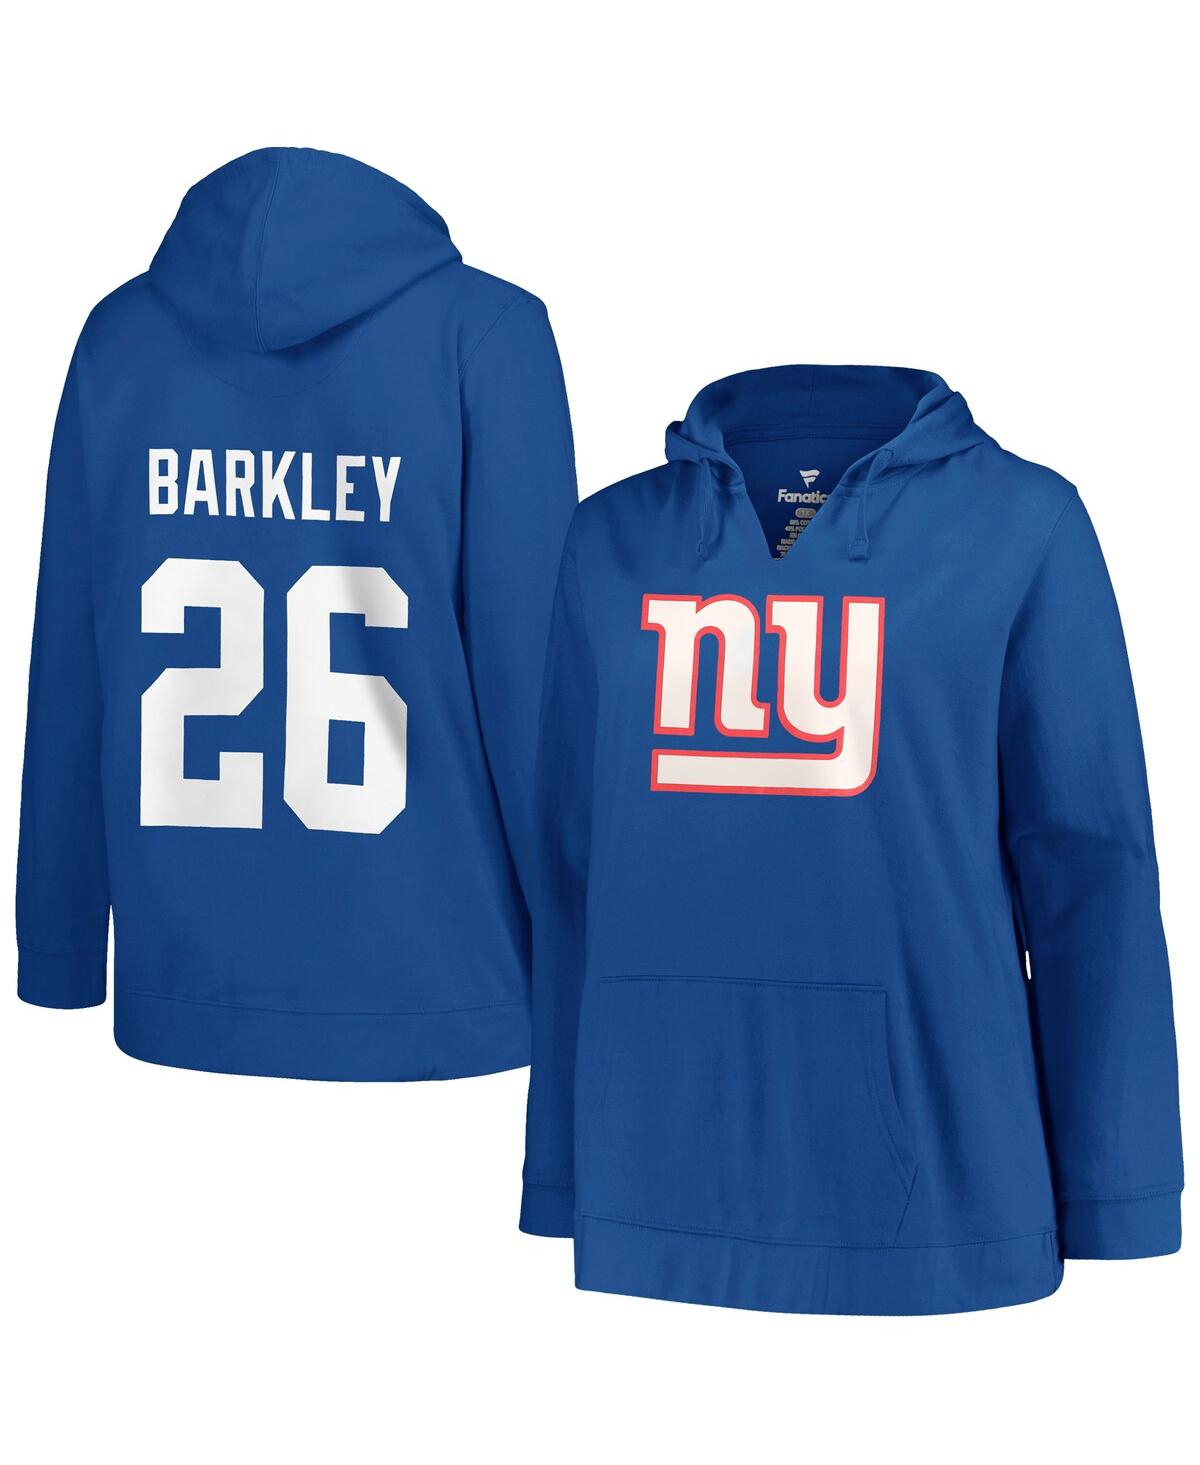 Women's Profile Saquon Barkley Royal New York Giants Plus Size Player Name and Number Pullover Hoodie - Royal